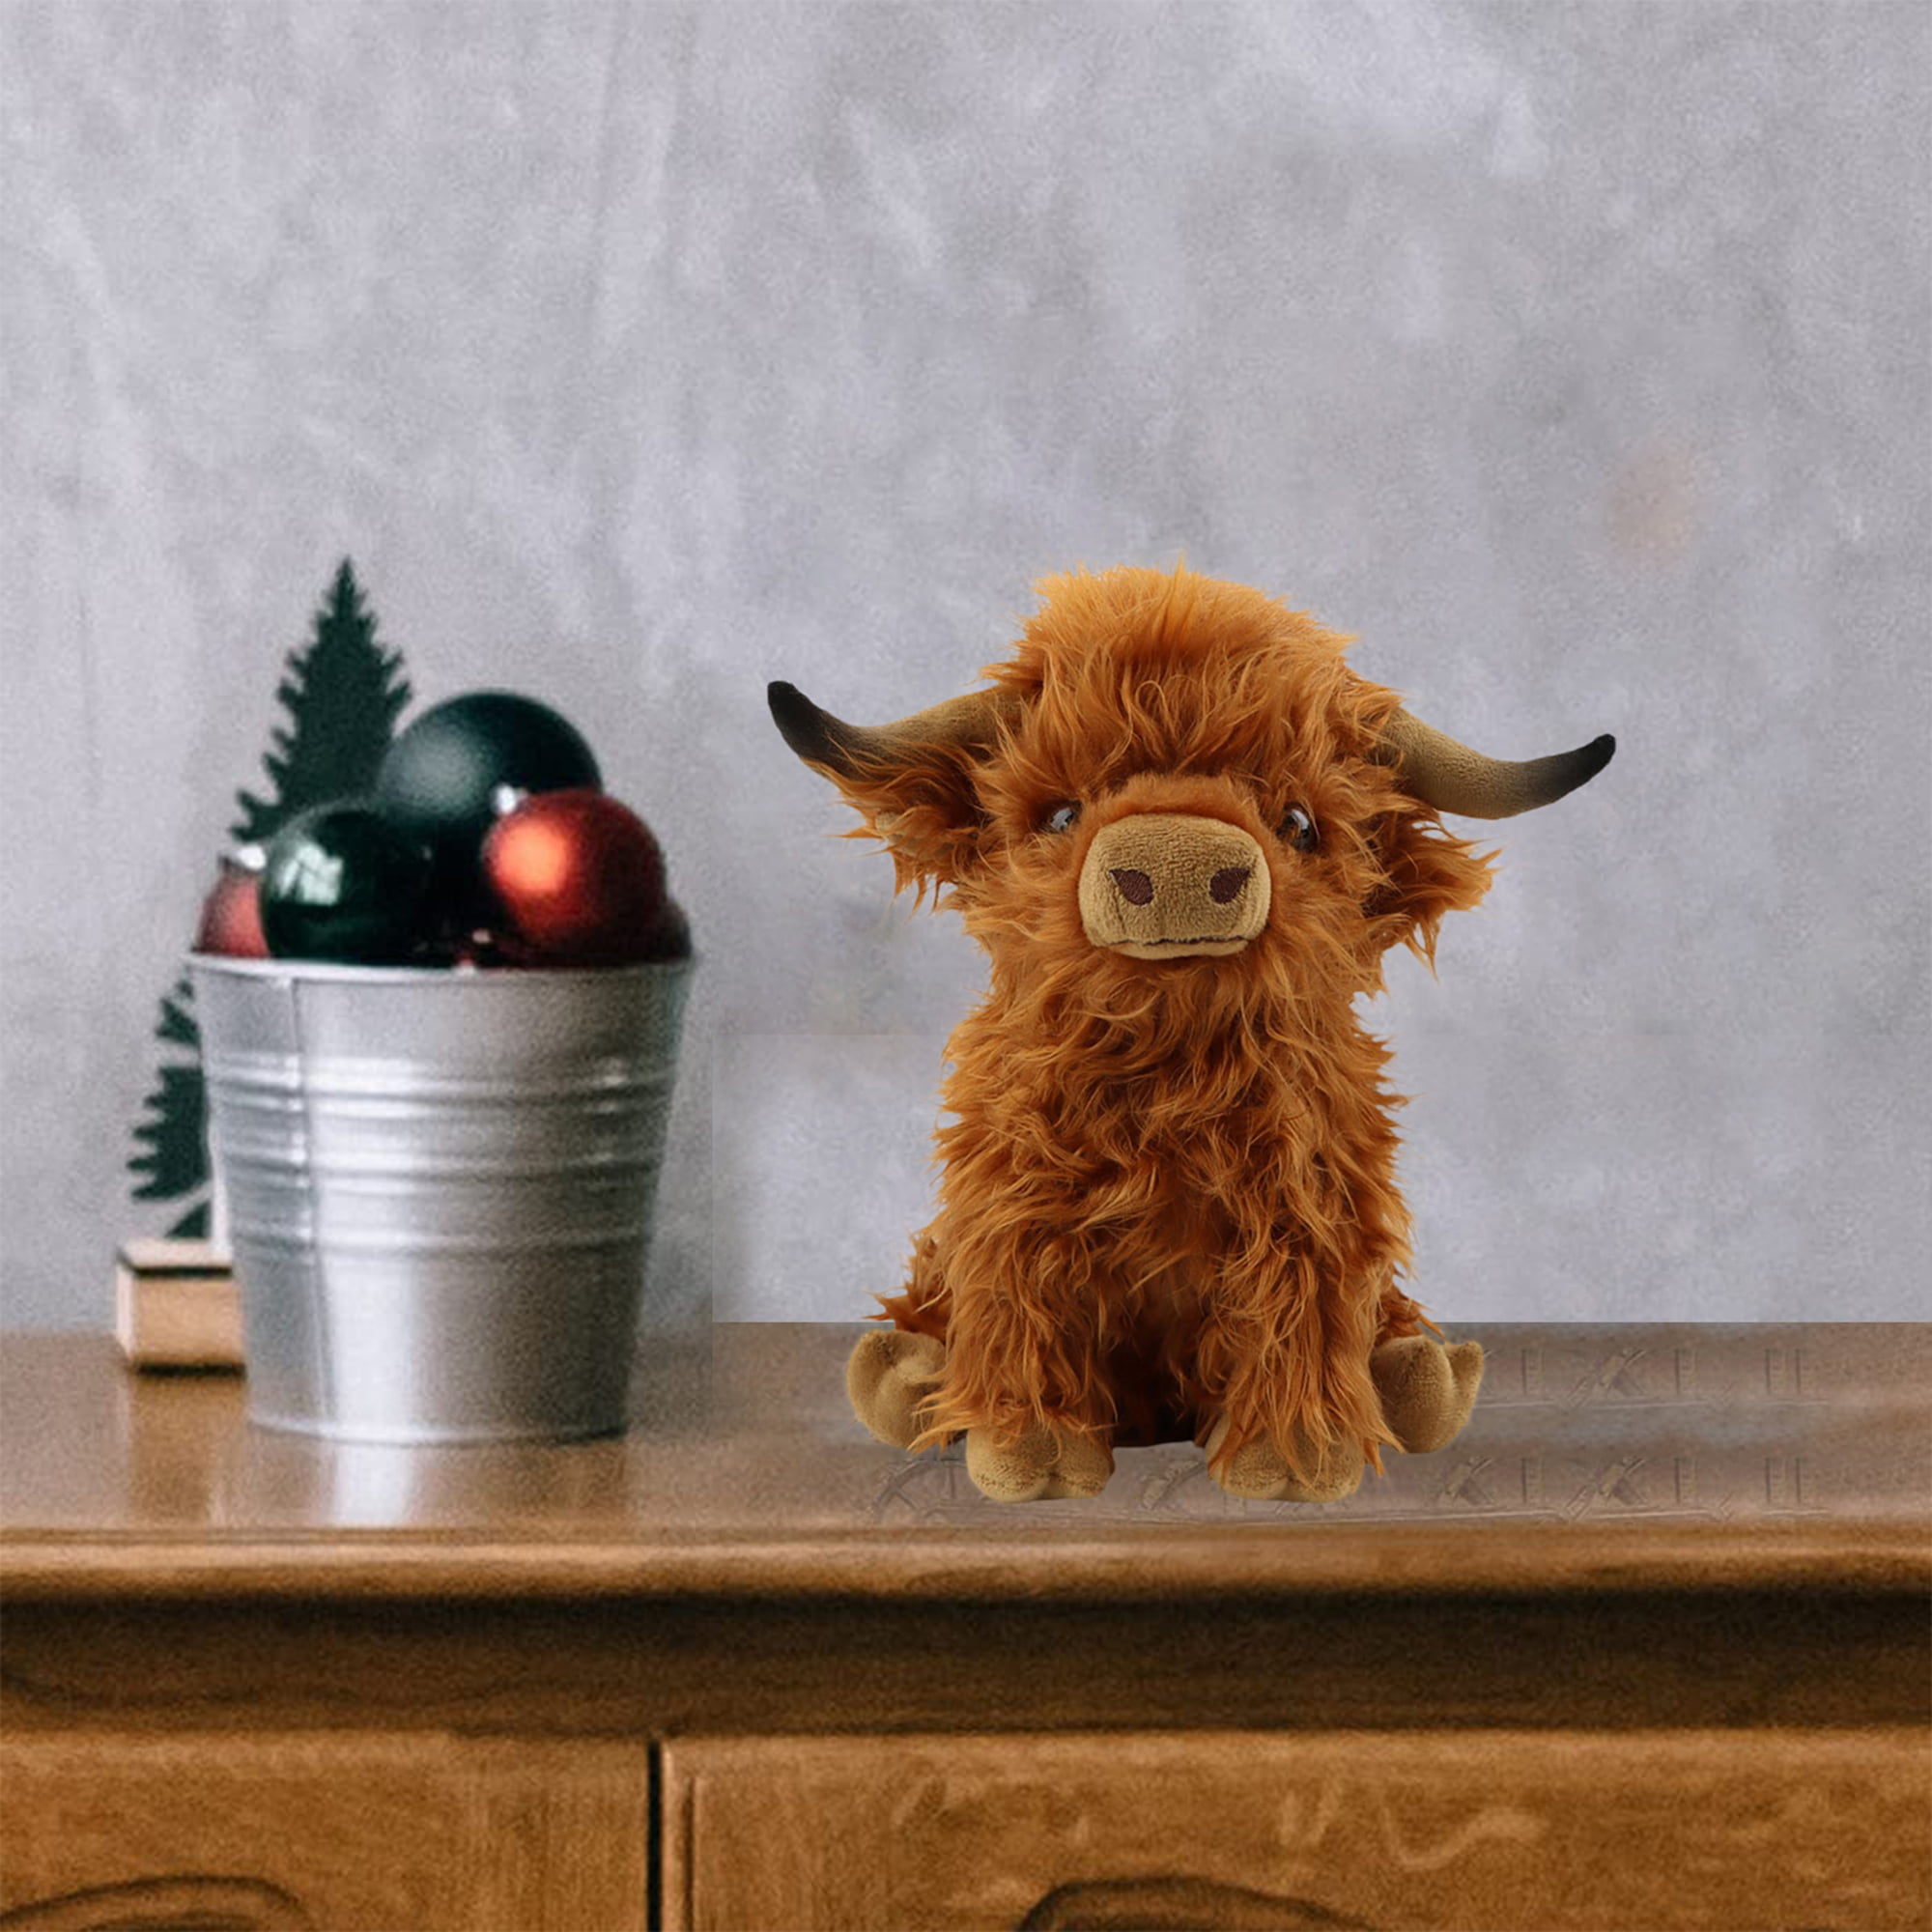 Scottish Highland Cow Plush Toy, Cute Stuffed Animal Doll With Hairy Fur,  Gift For Kids